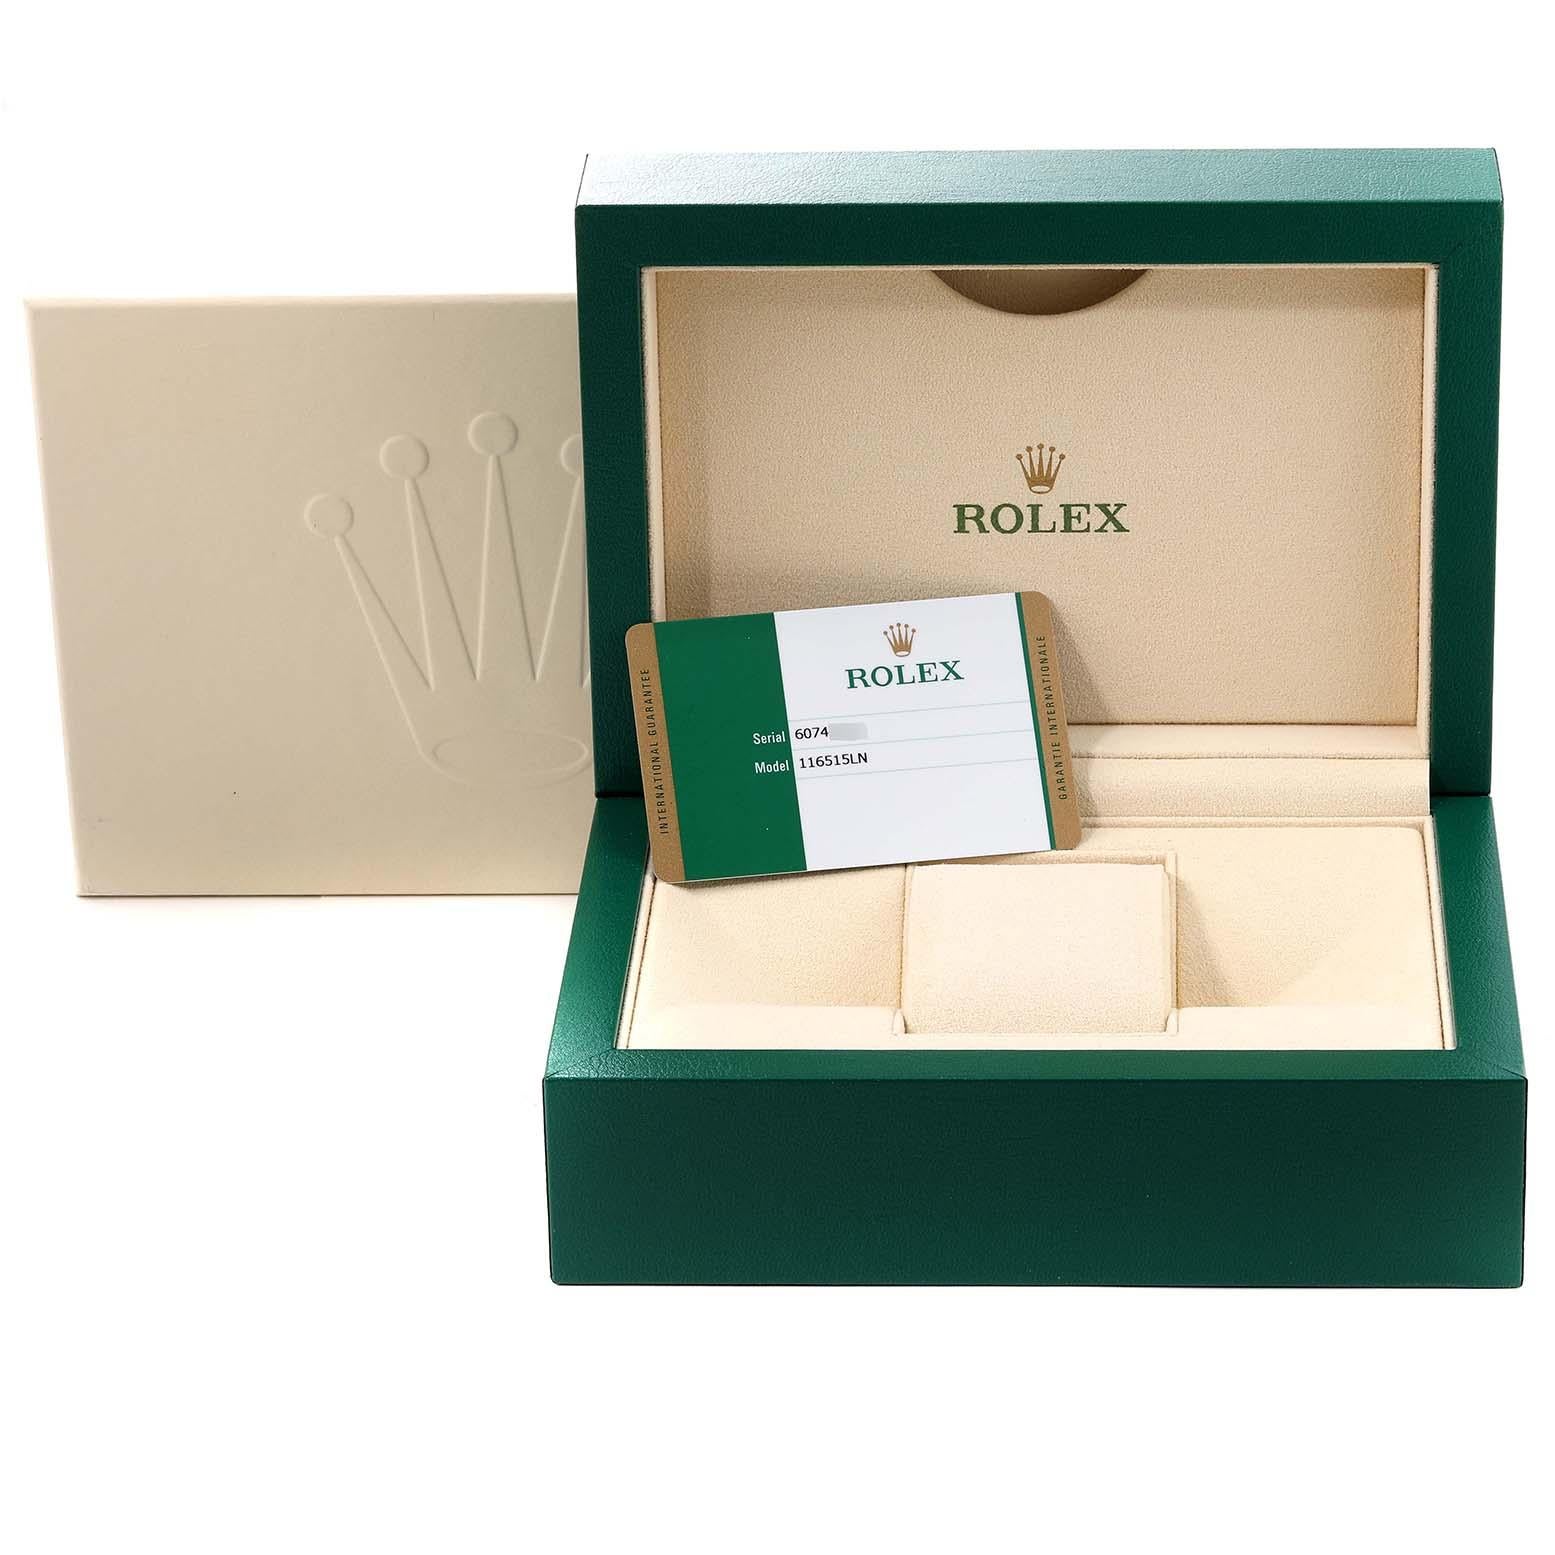 Rolex Cosmograph Daytona Rose Gold Mens Watch 116515 Box Card For Sale 7